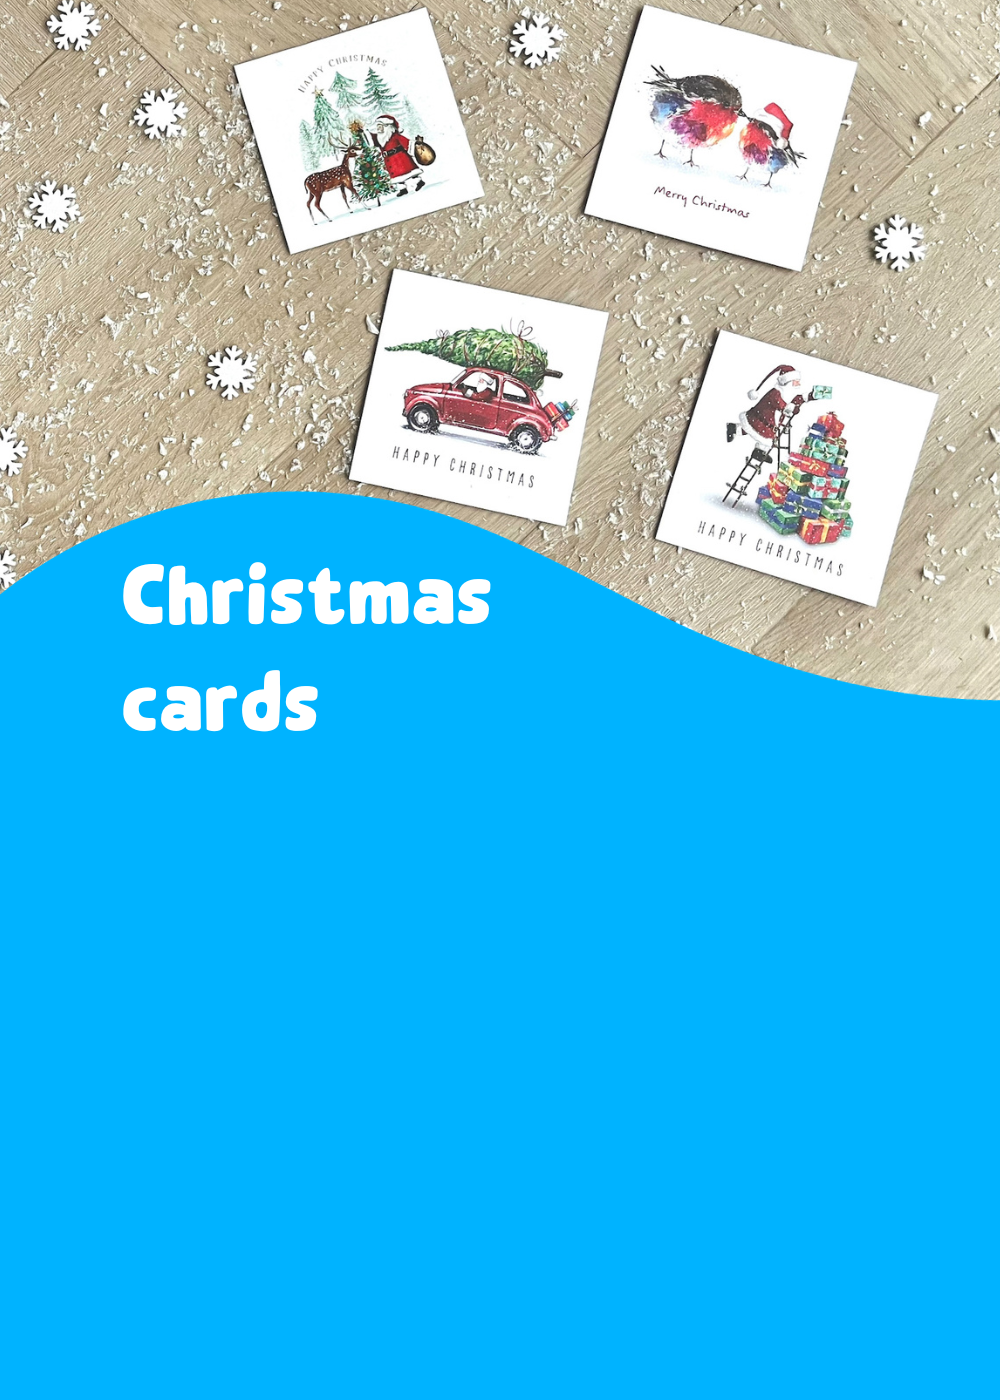 View our range of charity Christmas cards FSC paper and card 100% recyclable